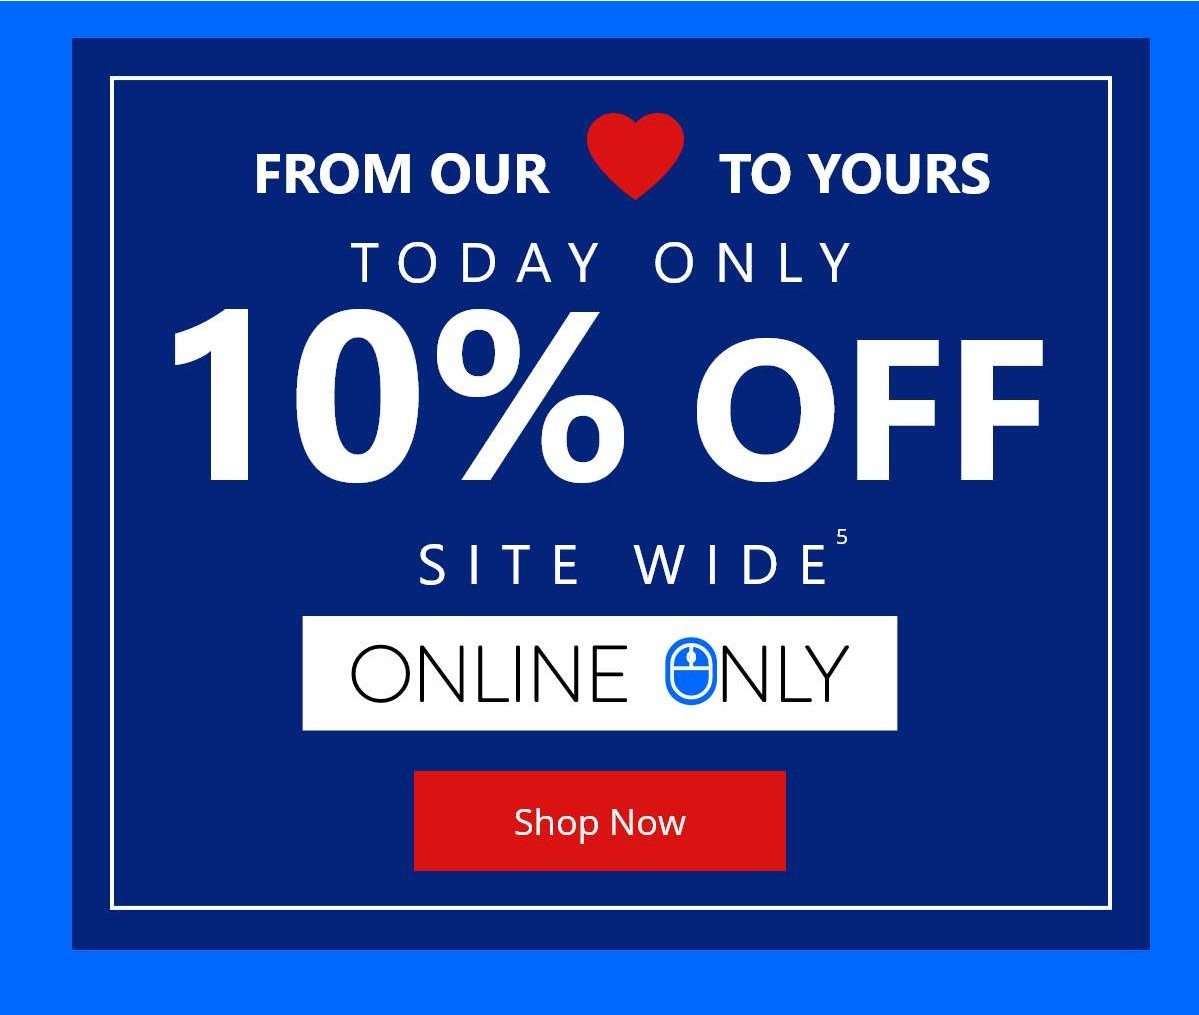 Today only 10% off sitewide